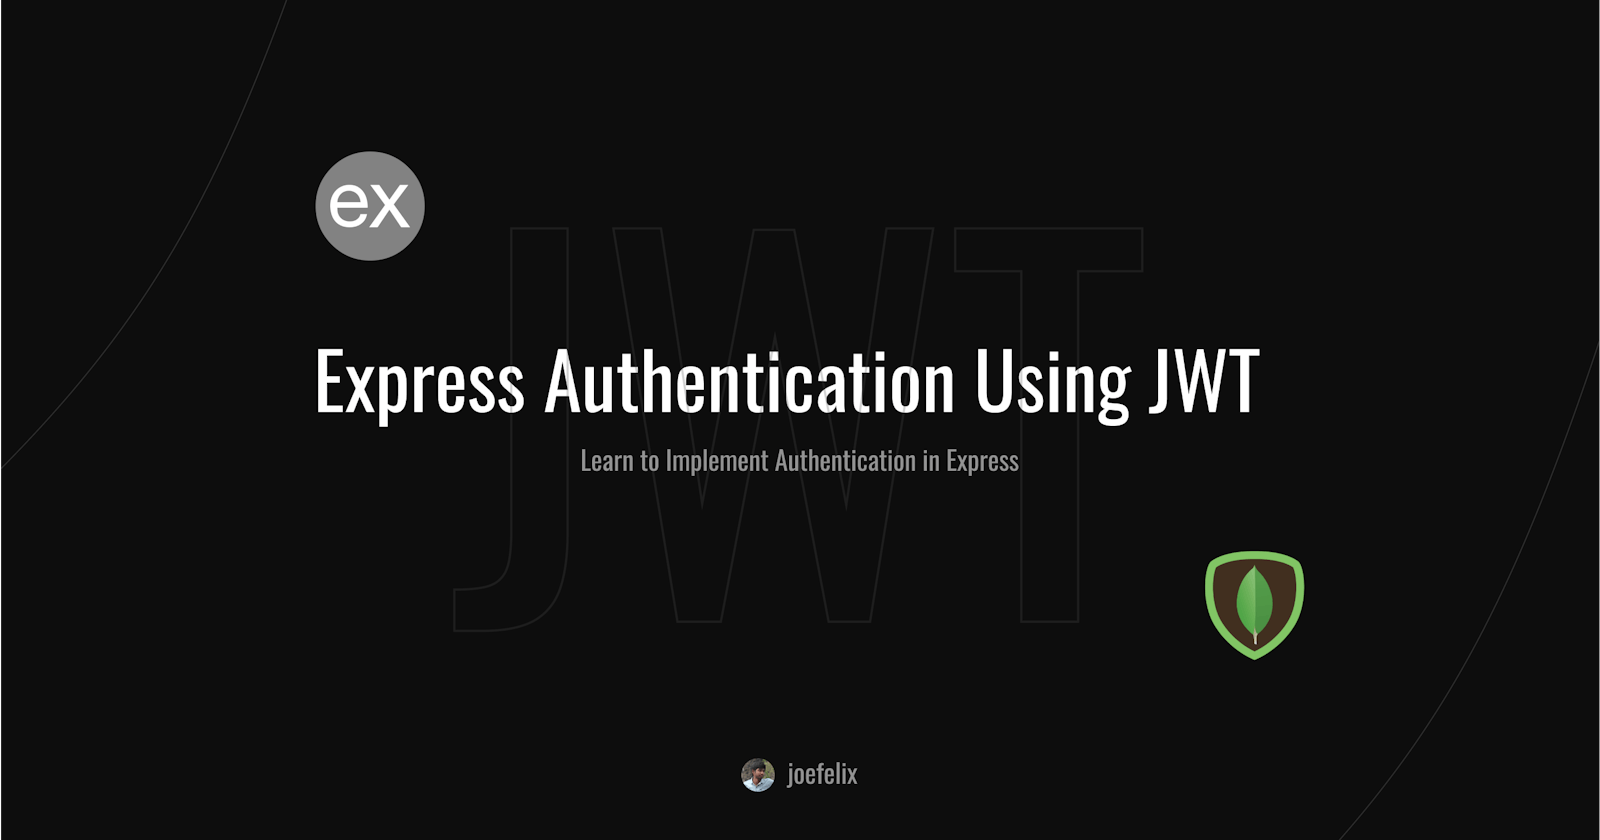 Express Authentication Using JWT: A Step-by-Step Guide